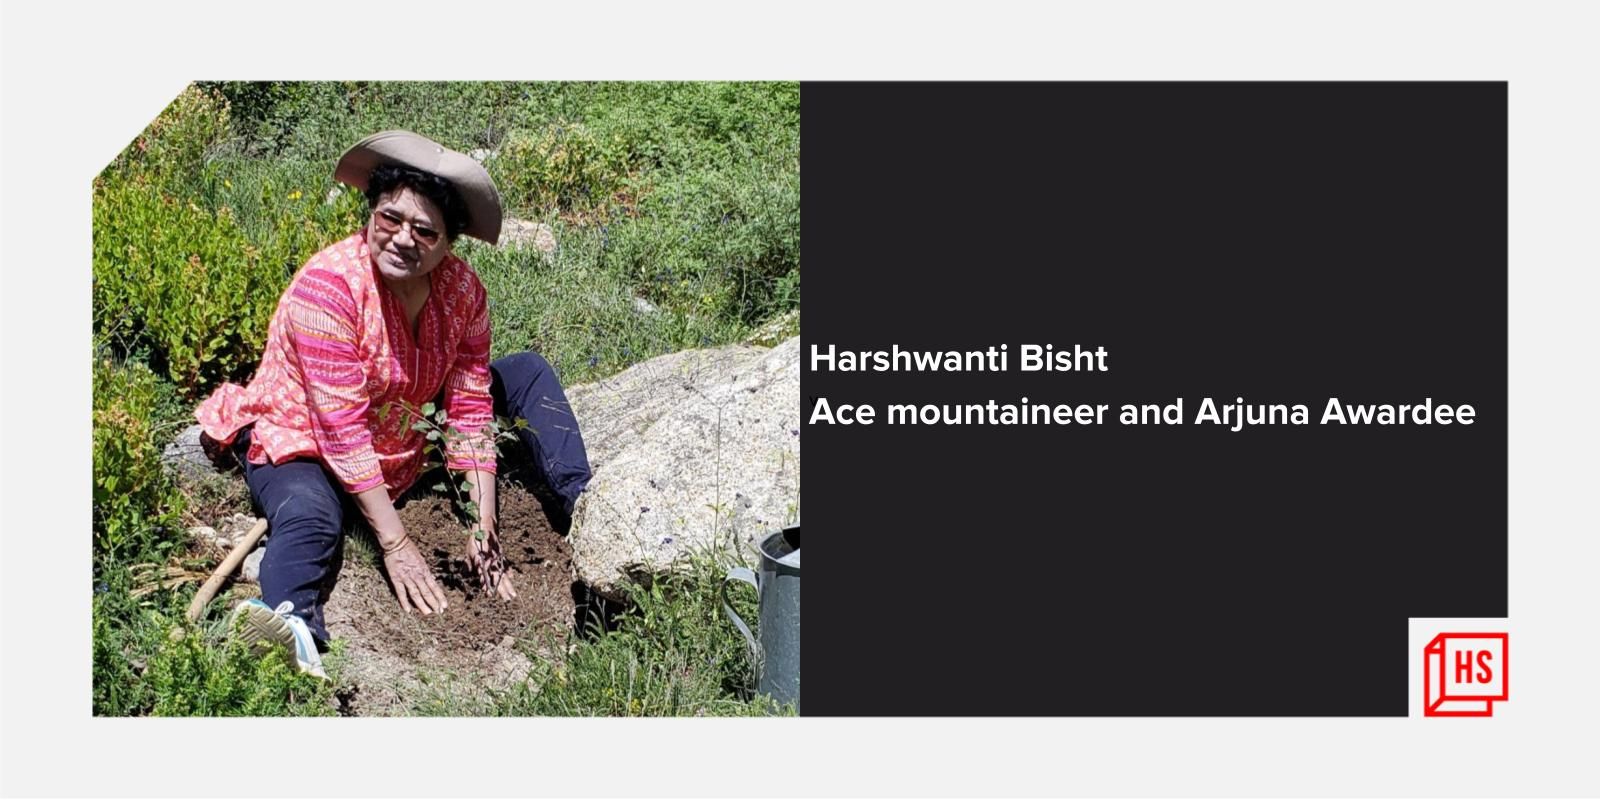 Summiting mountains, breaking glass ceilings, and saving the environment: Harshwanti Bisht's journey
